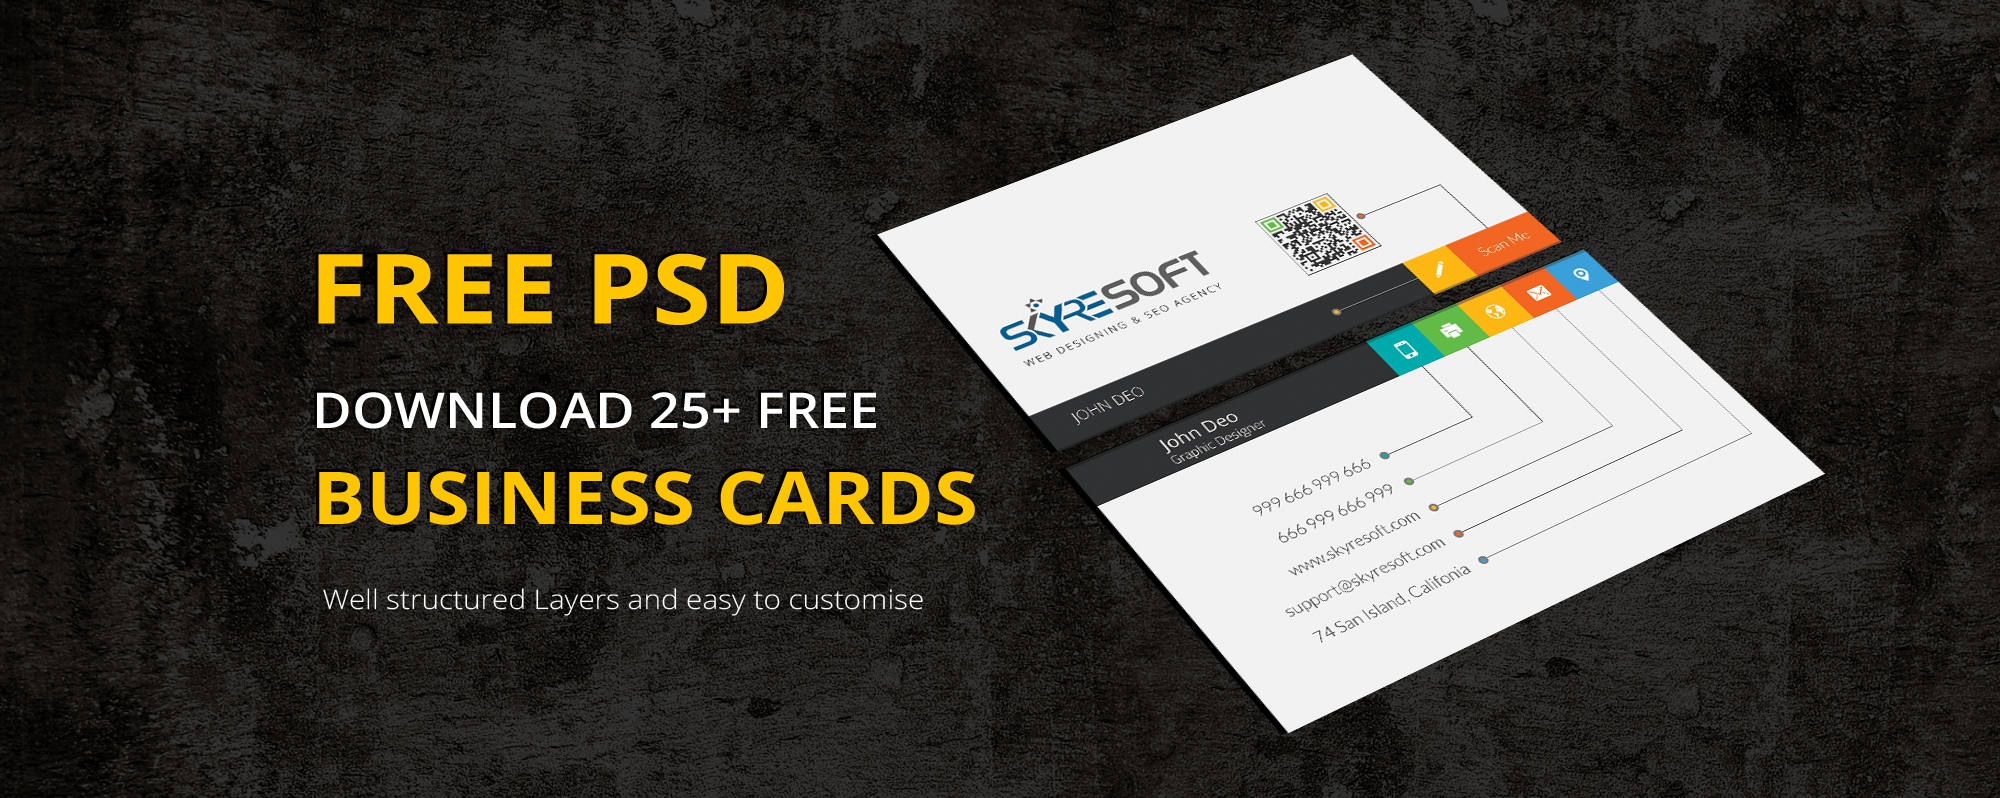 free download business card template psd 300 dpi rent cars